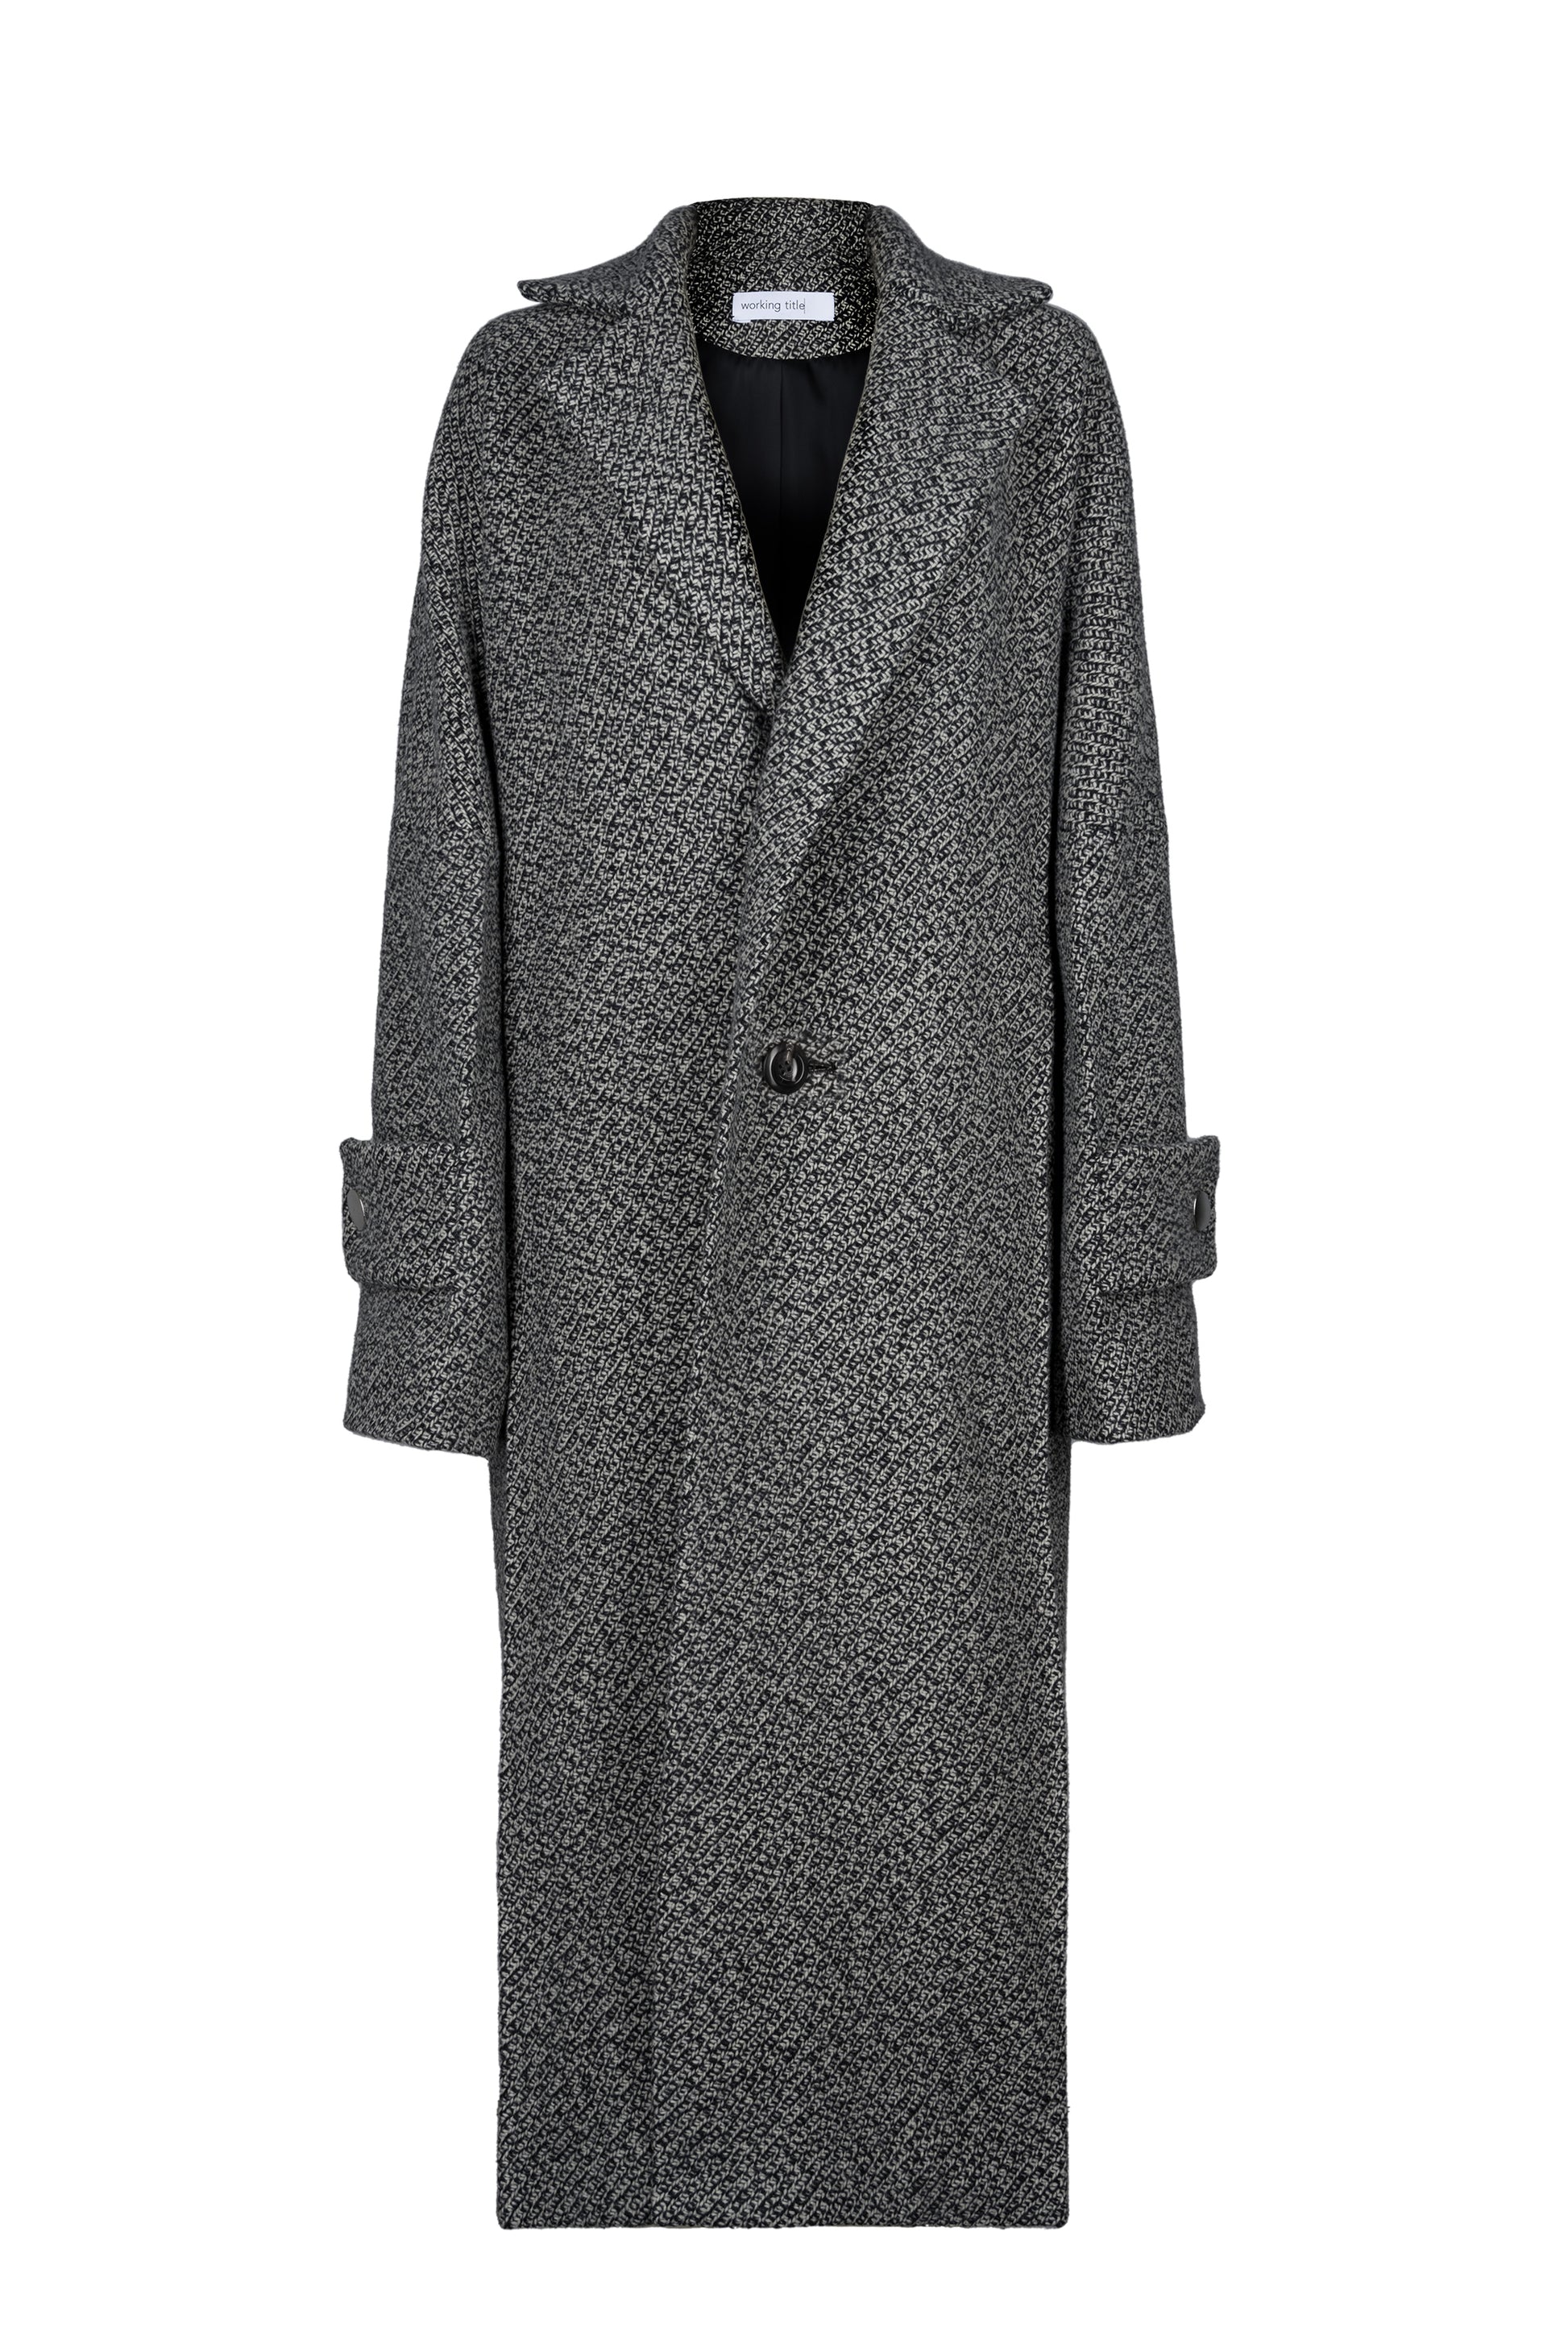 Stylish long kinono coat with a black and white woollen fabric, featuring a notched collar, single-button front closure, and soft shoulders for a sophisticated, timeless look